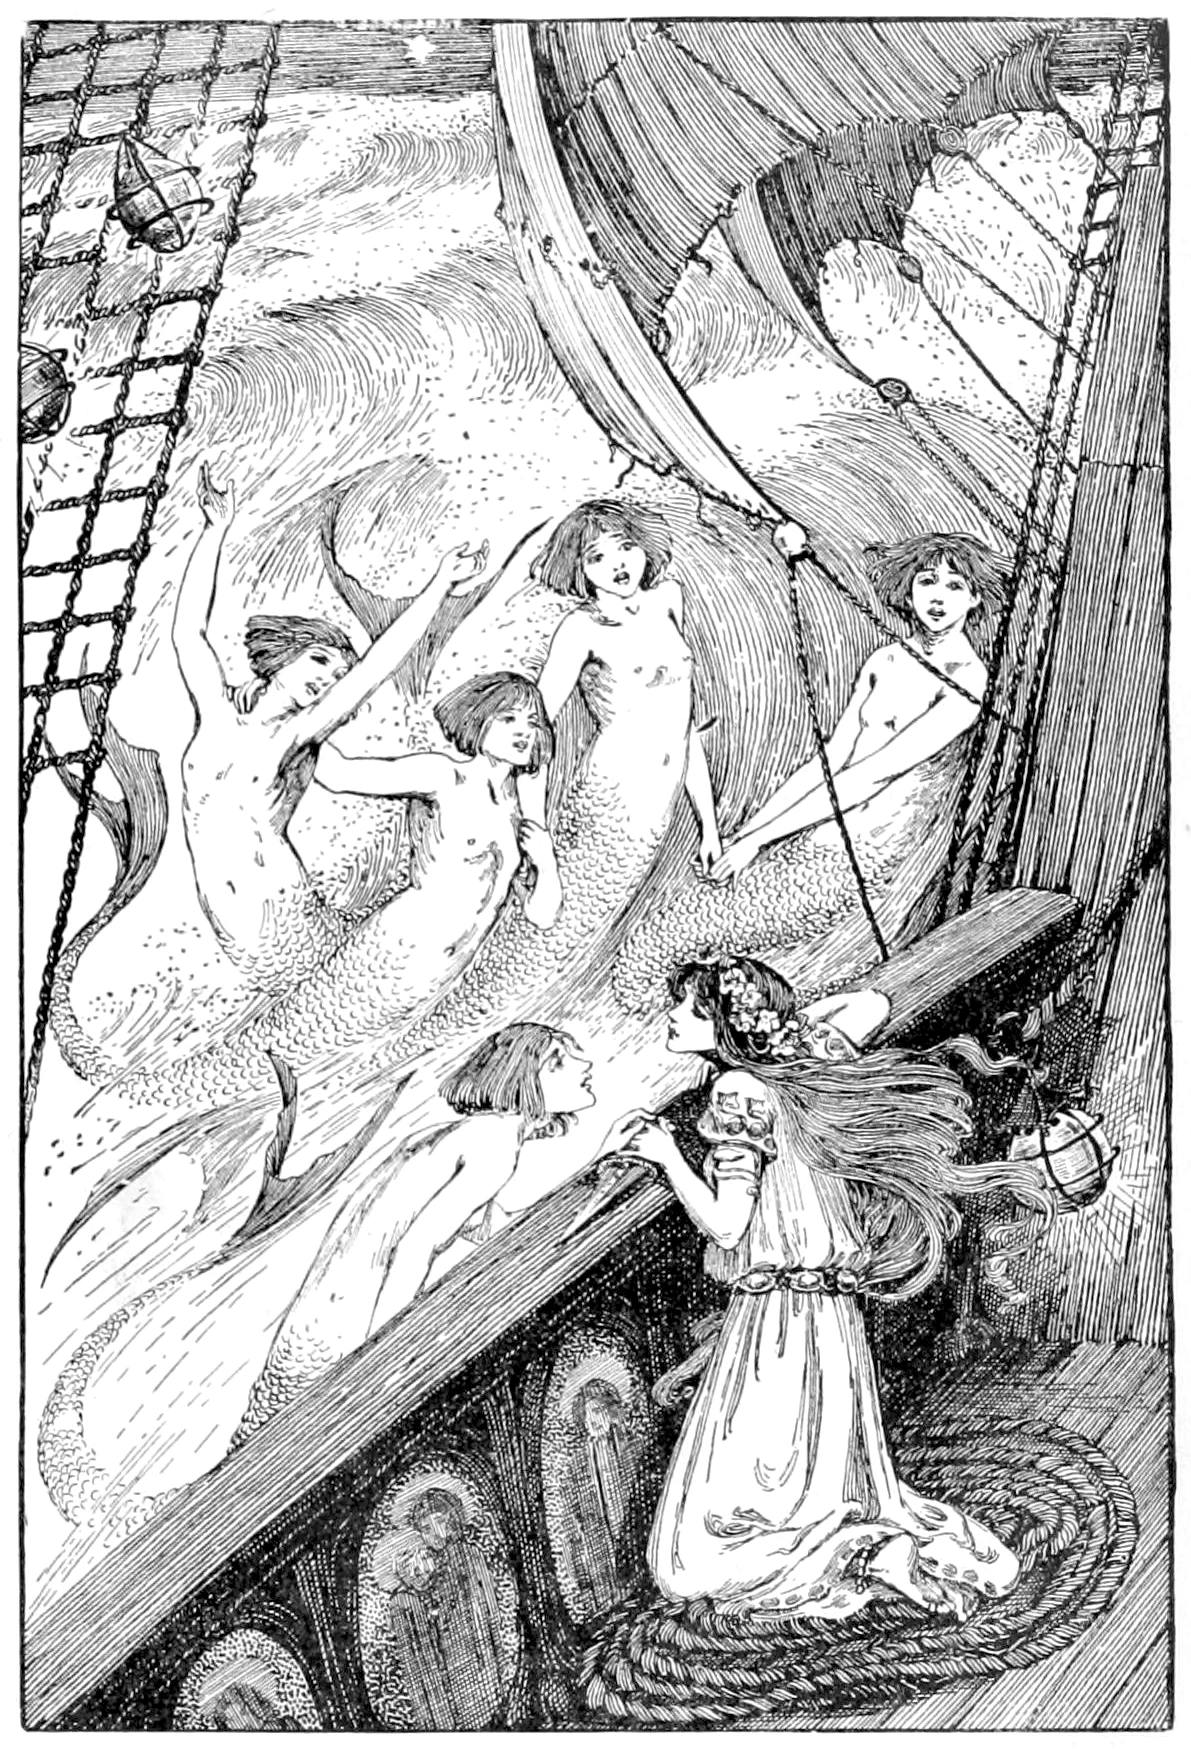 Illustration in a collection of Anderson's Fairy tales. 1899. Public domain via Wikimedia Commons